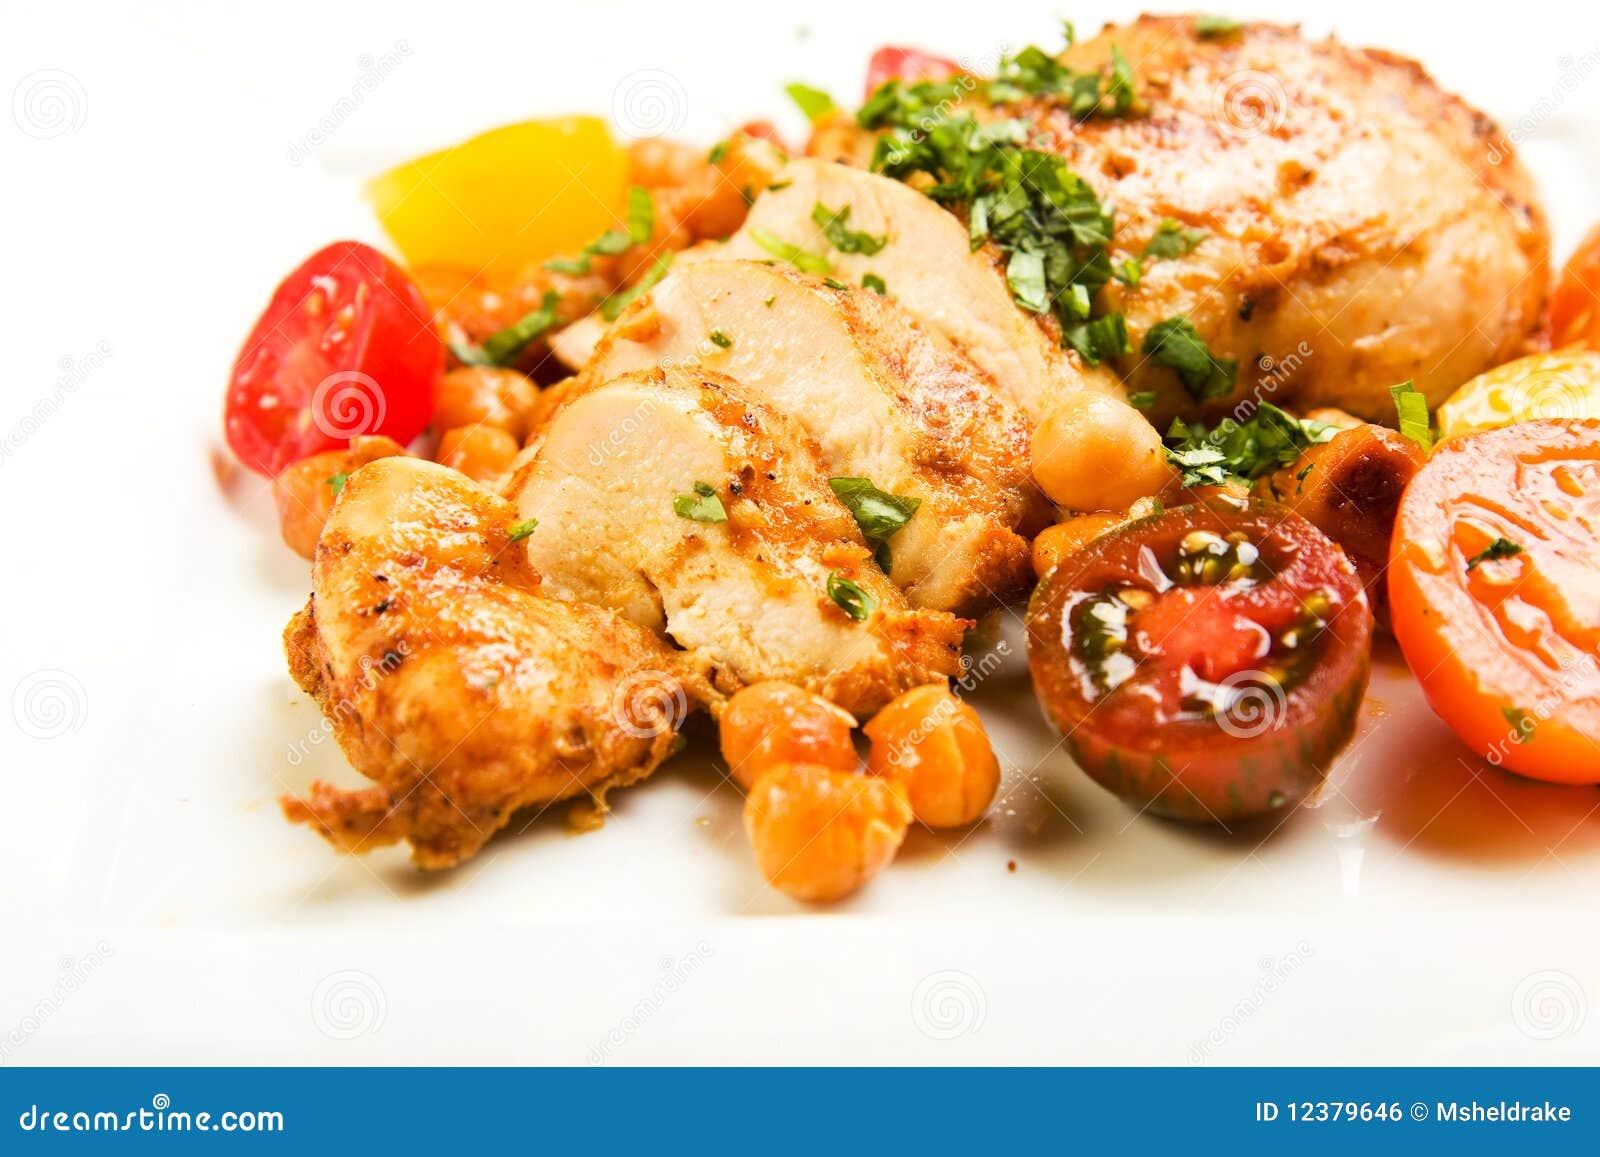 chicken with tomatoes and garbanzo beans